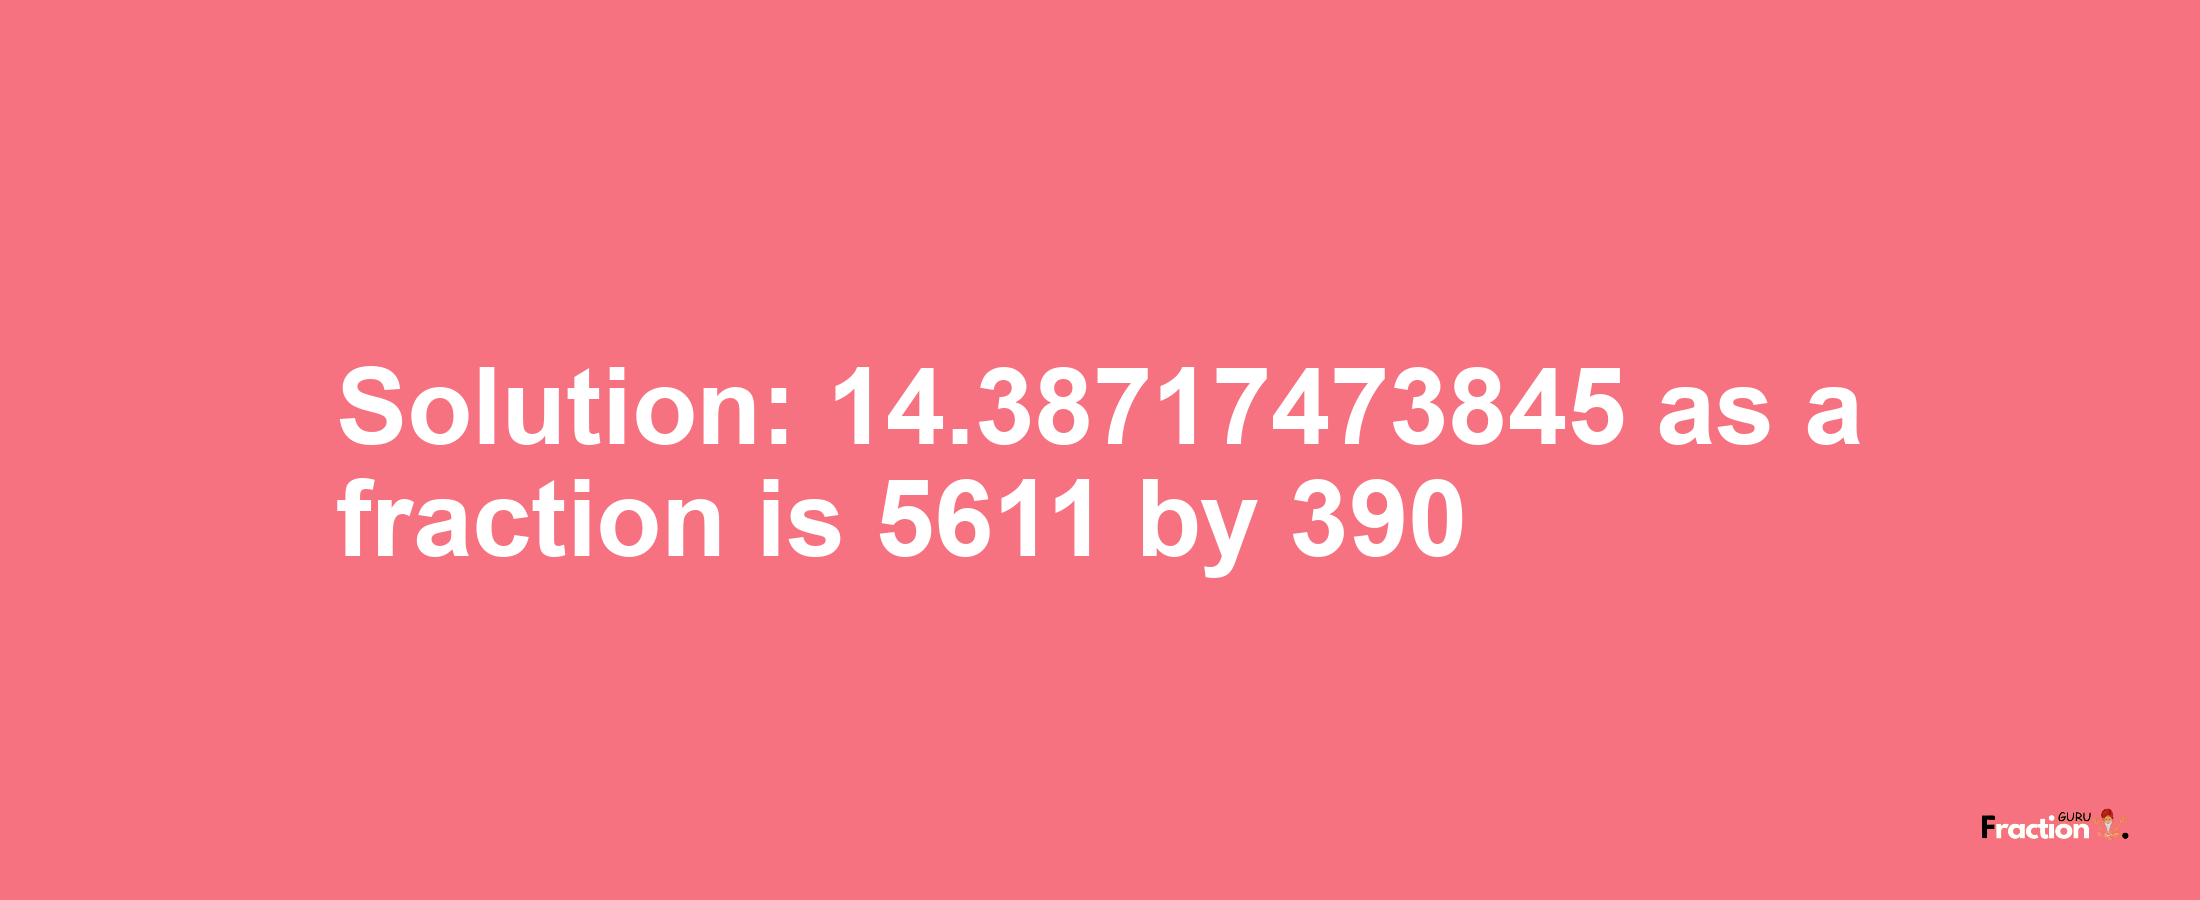 Solution:14.38717473845 as a fraction is 5611/390